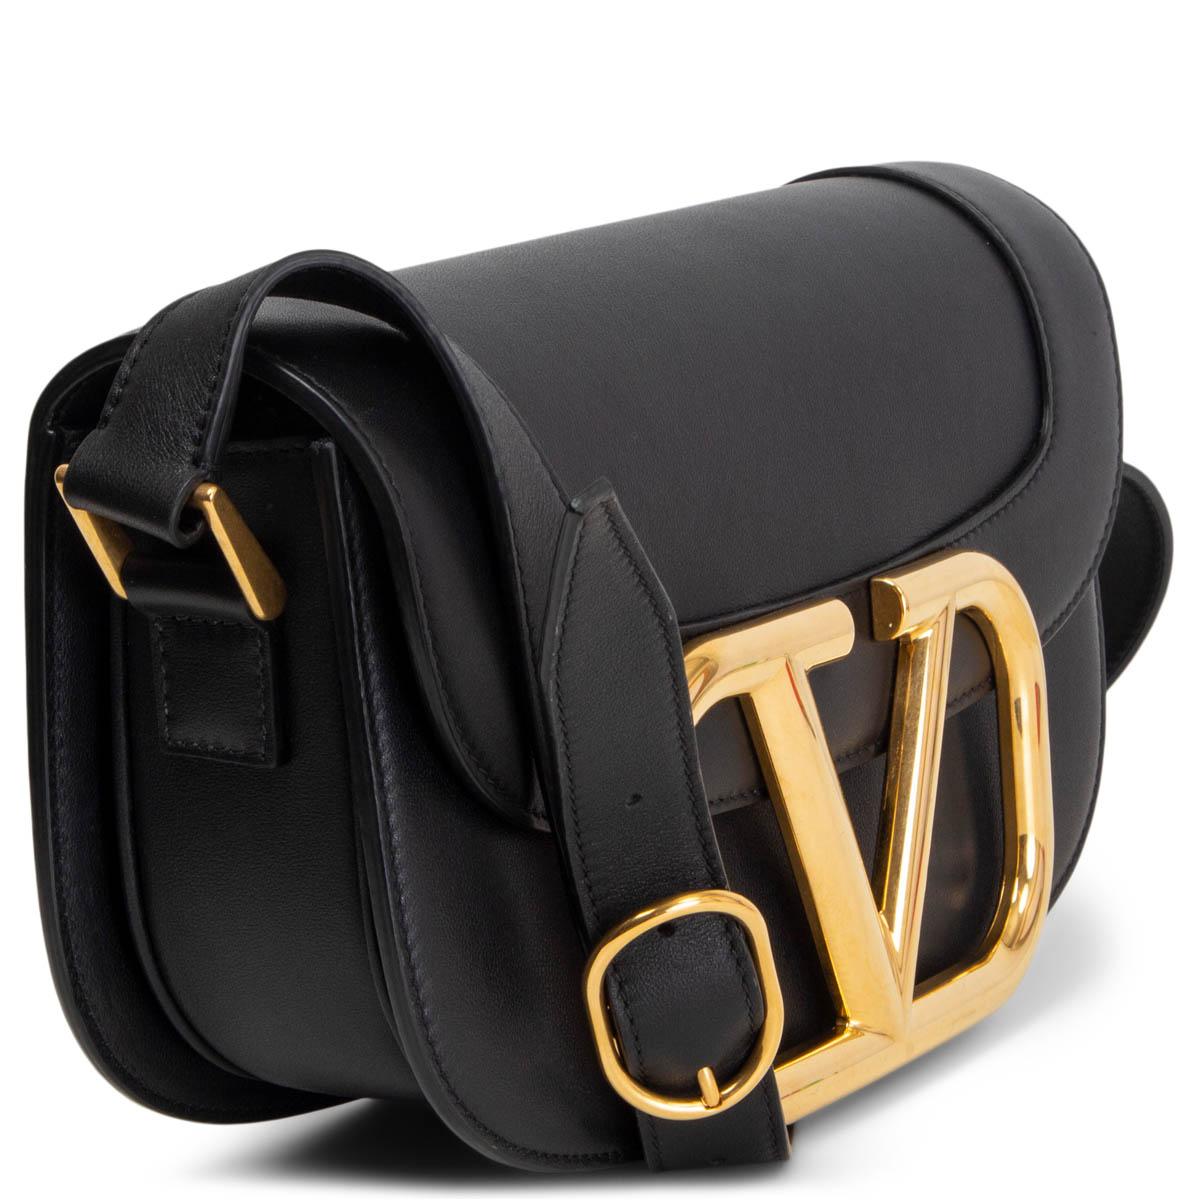 100% authentic Valentino Garavani SUPERVEE leather cross body bag in black calfskin. Comes with an adjustable shoulder strap and features a fold over front flap, gold tone VLOGO plaque and magnetic press stud. Lined in black leather and divided in